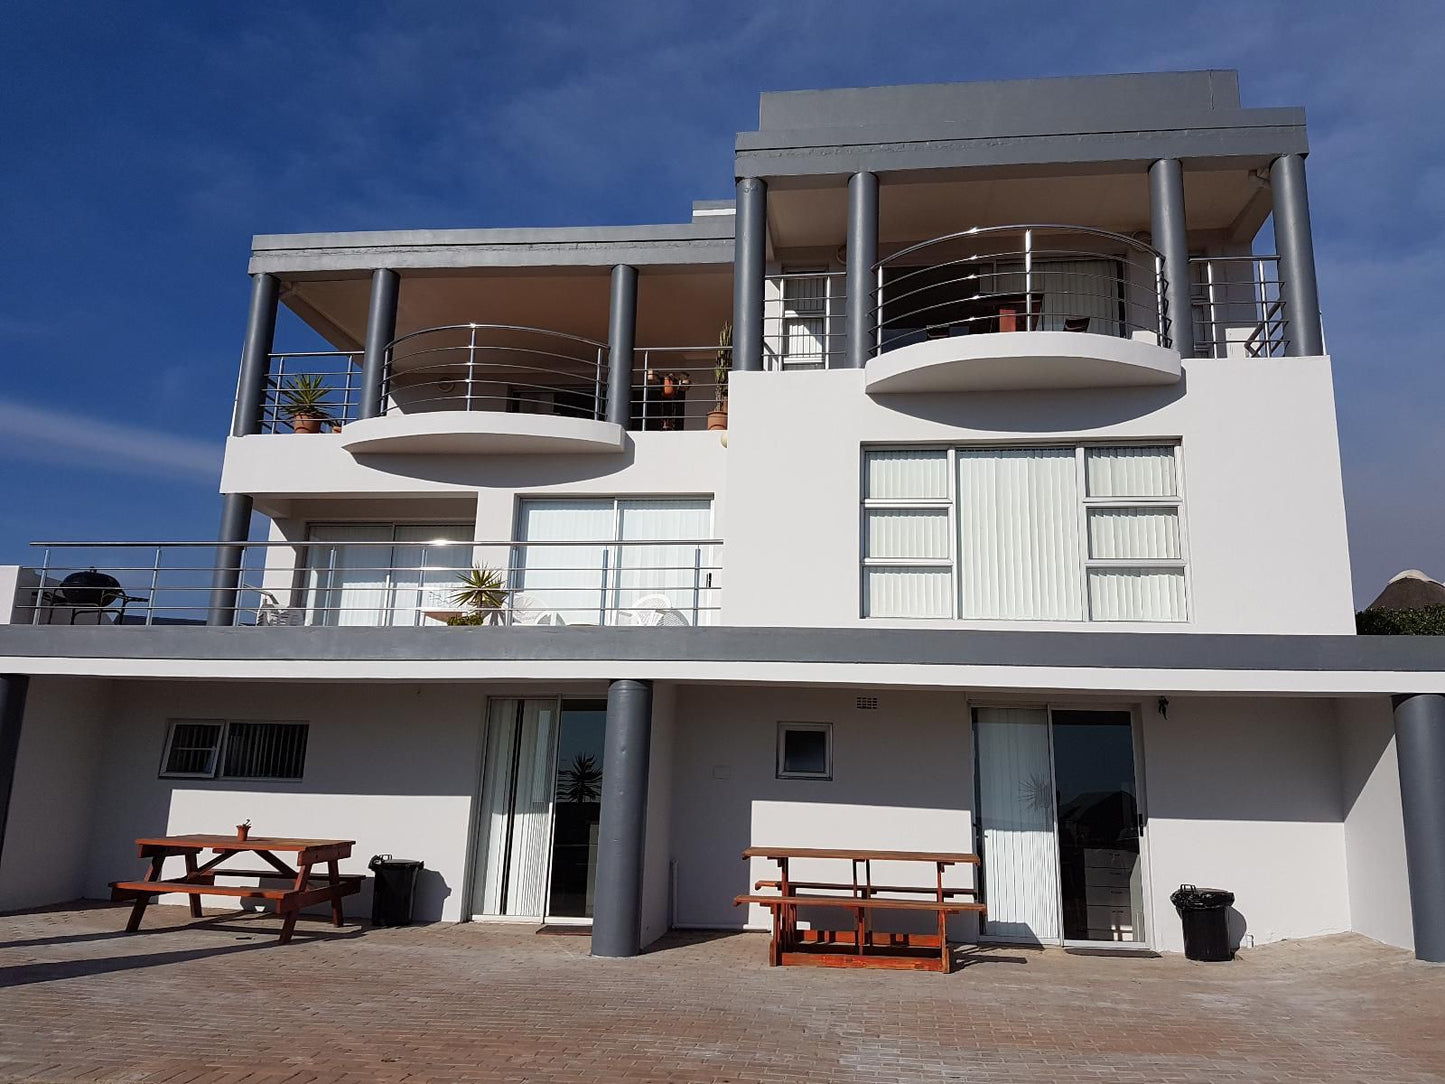 Sunbirdsview Myburgh Park Langebaan Western Cape South Africa Balcony, Architecture, House, Building